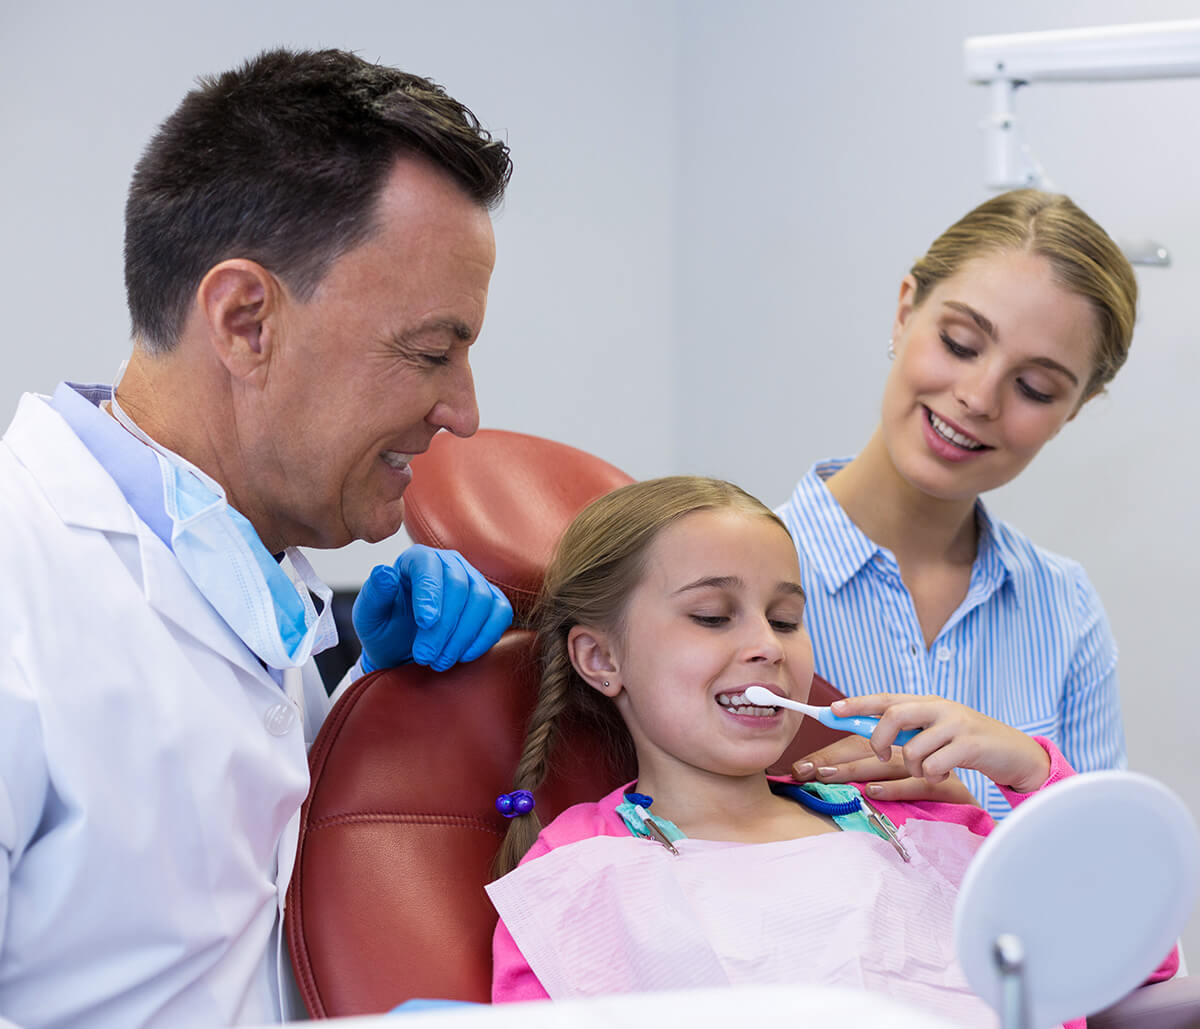 Find a Dentist for Kids Near Me in the Hamilton, on Area